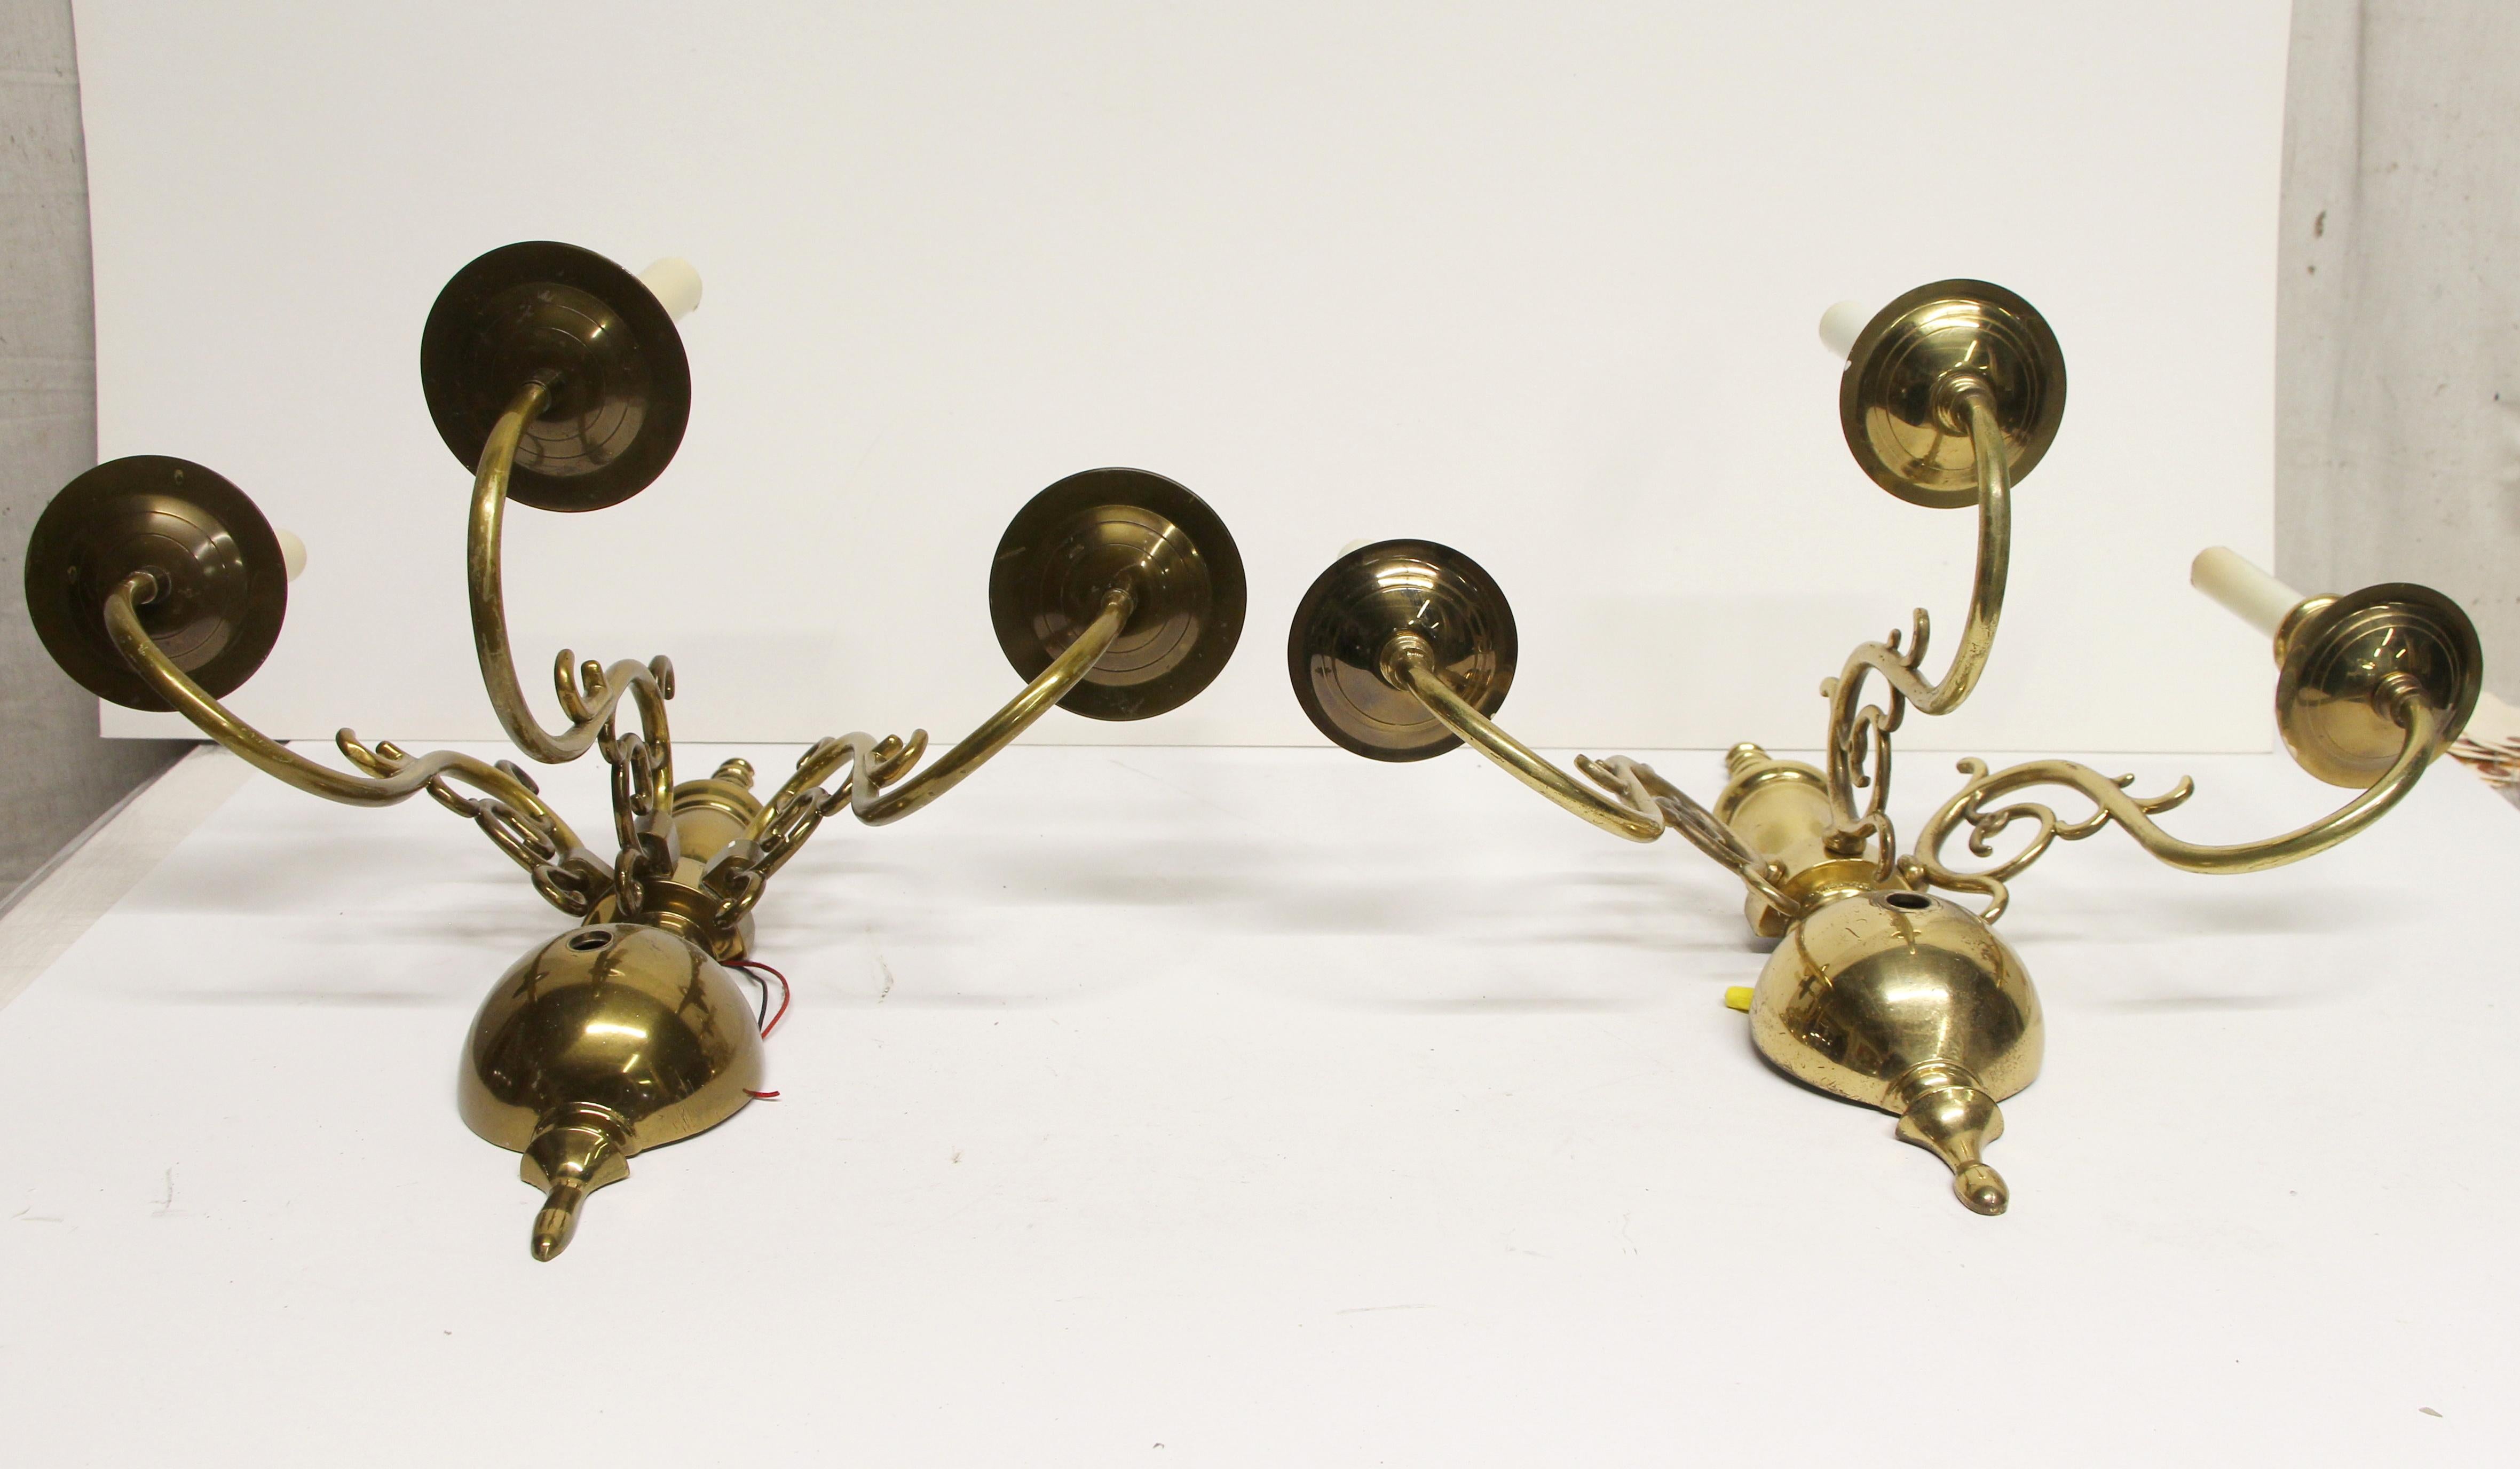 1980s Pair of NYC Waldorf Astoria Hotel Brass Colonial Style Three-Light Sconces (Poliert)